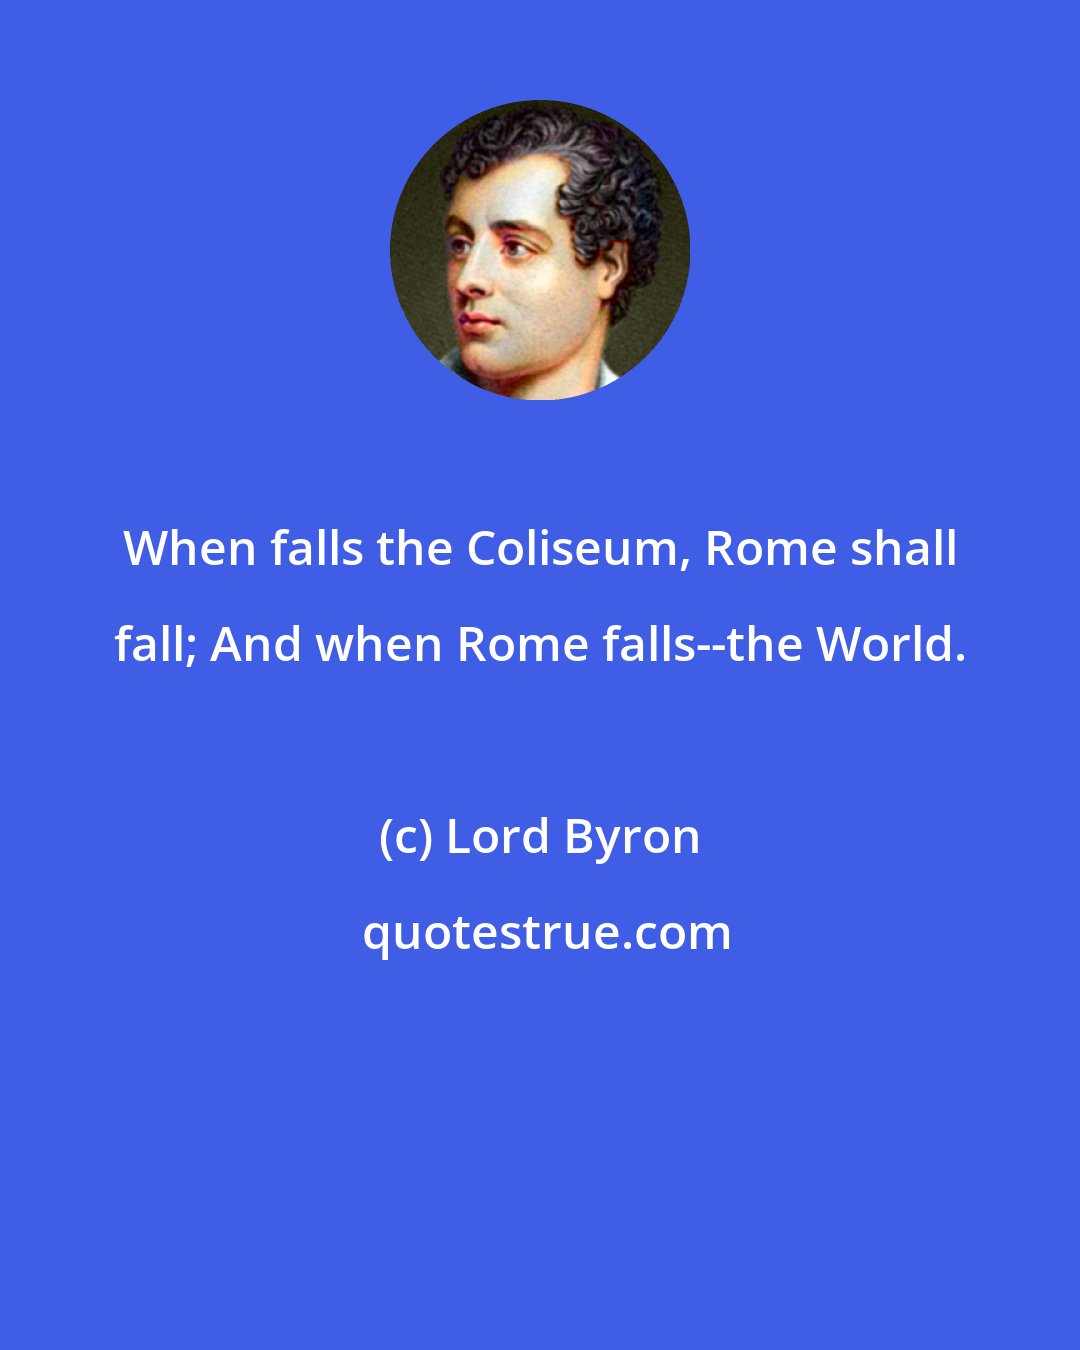 Lord Byron: When falls the Coliseum, Rome shall fall; And when Rome falls--the World.